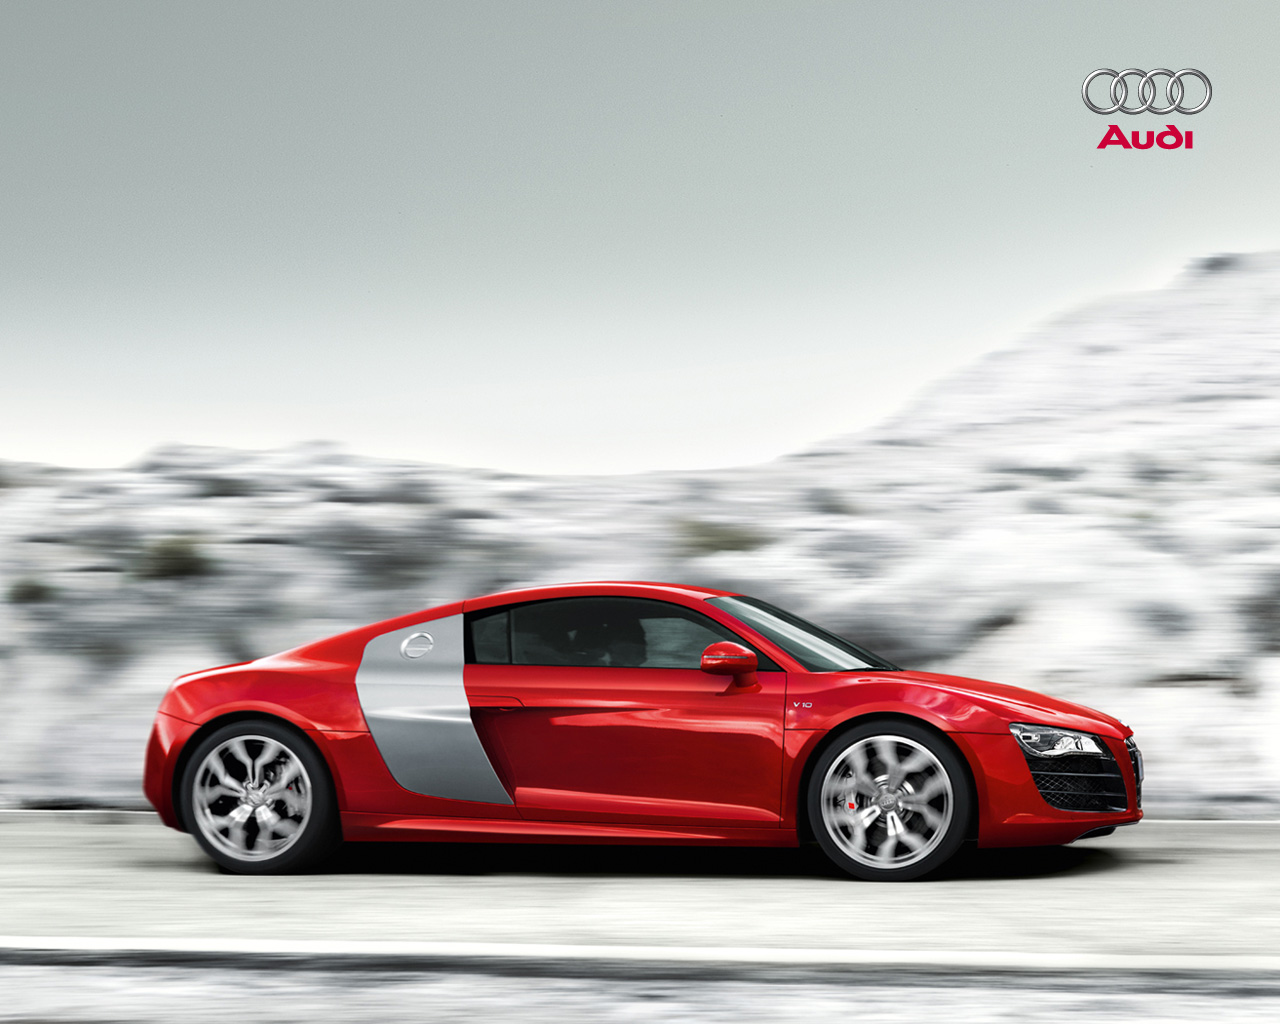 Audi_R8_Red_And_Black_7